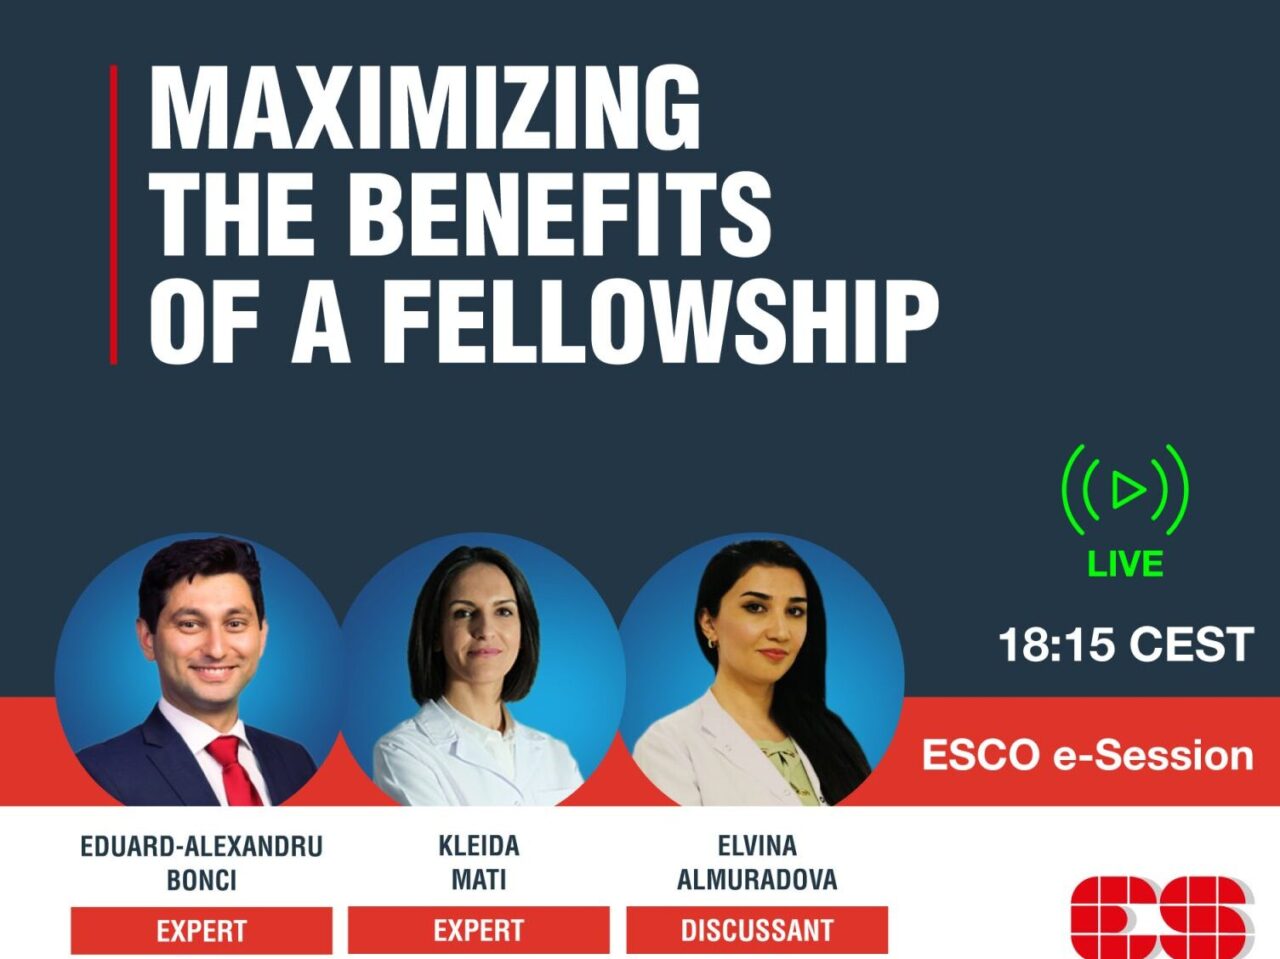 Don’t miss the dedicated ESCO e-session on Maximizing the benefits of a Fellowship – European School of Oncology